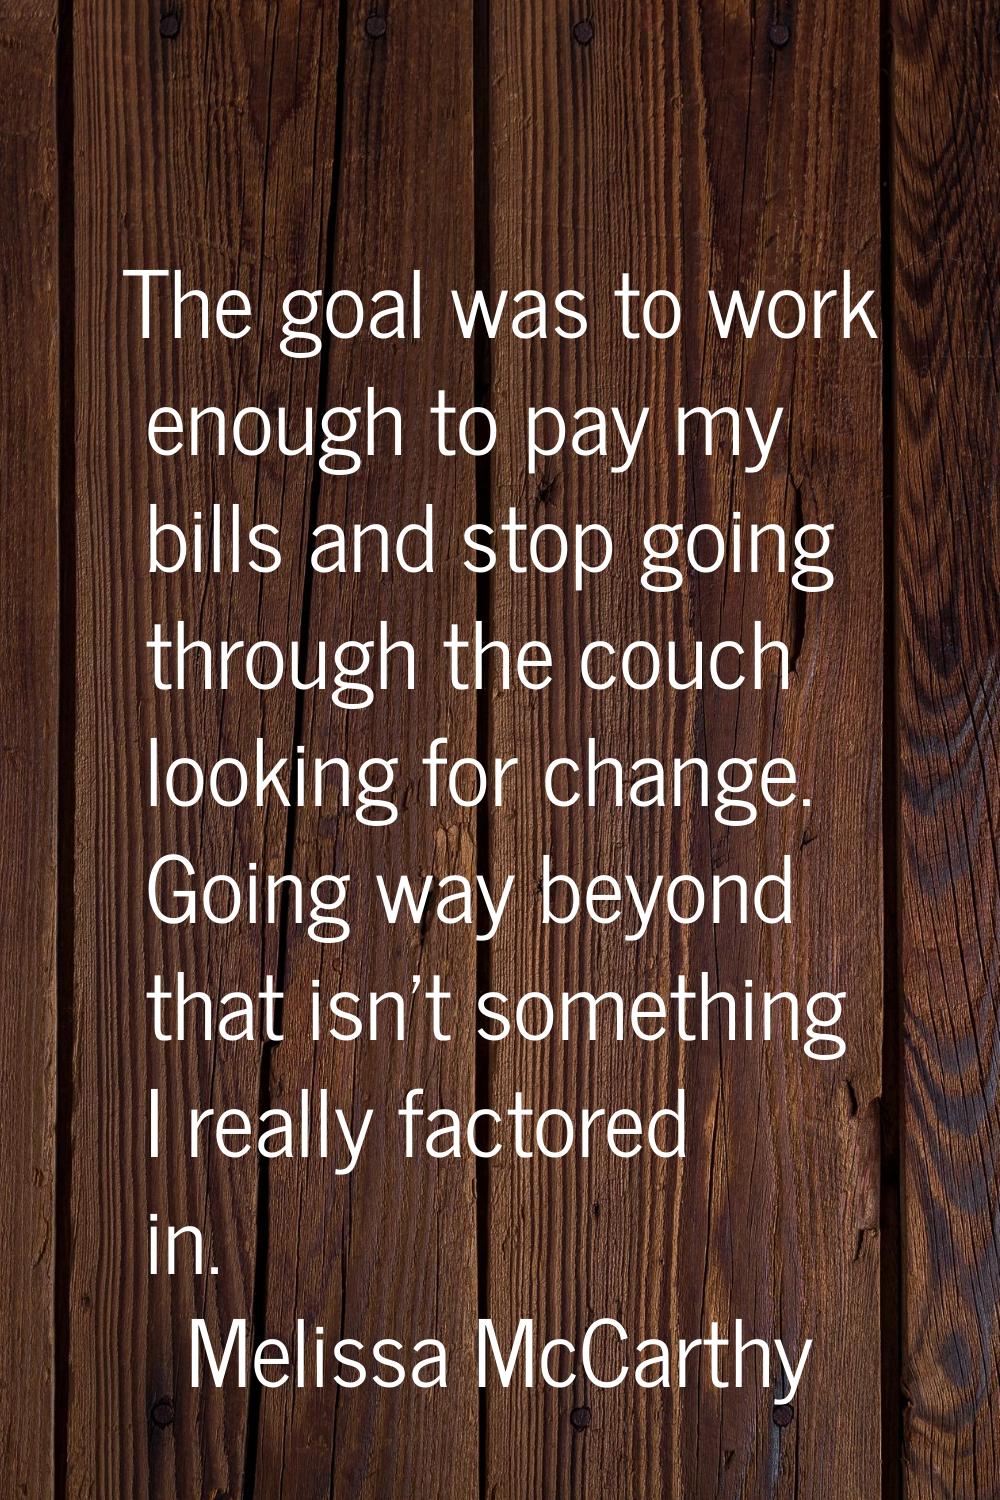 The goal was to work enough to pay my bills and stop going through the couch looking for change. Go